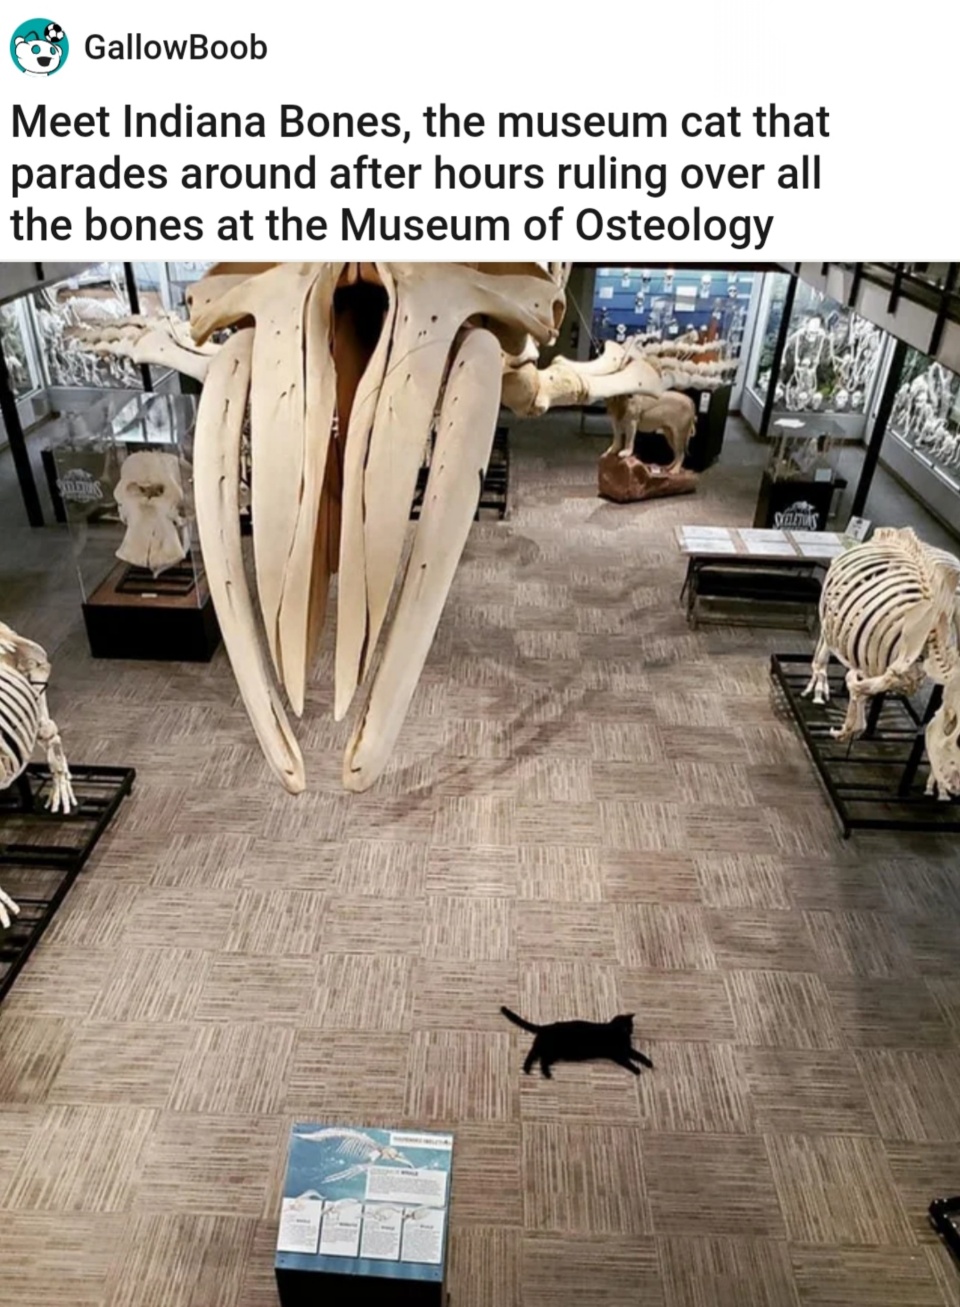 monday morning randomness - indiana bones cat - GallowBoob Meet Indiana Bones, the museum cat that parades around after hours ruling over all the bones at the Museum of Osteology Villetas Sceletins